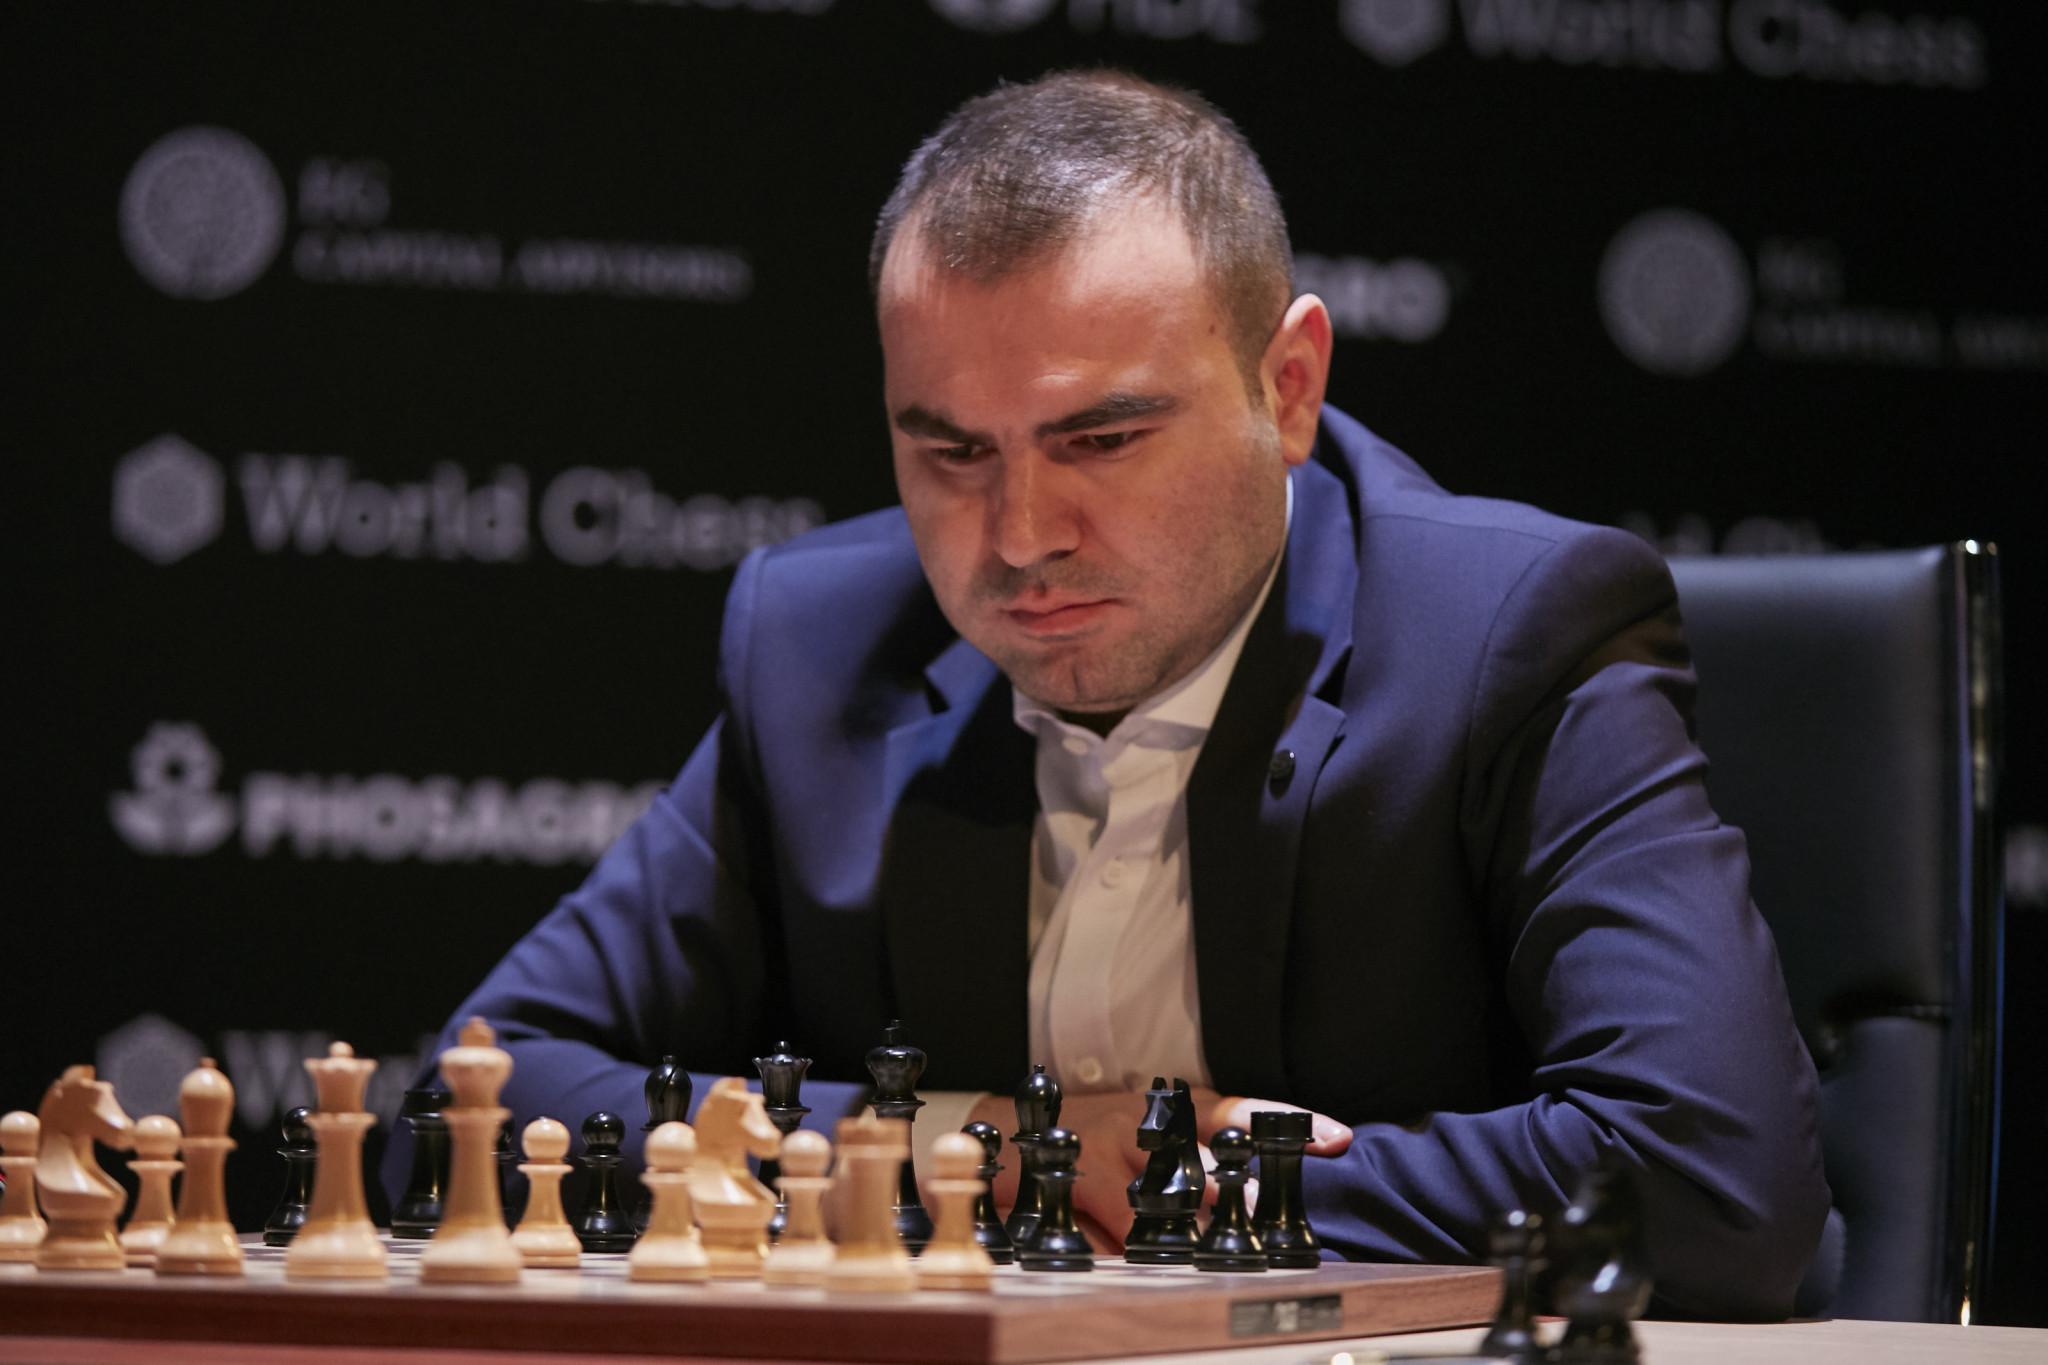 Azerbaijan’s Shakhriyar Mamedyarov currently occupies second place in the standings ©Getty Images